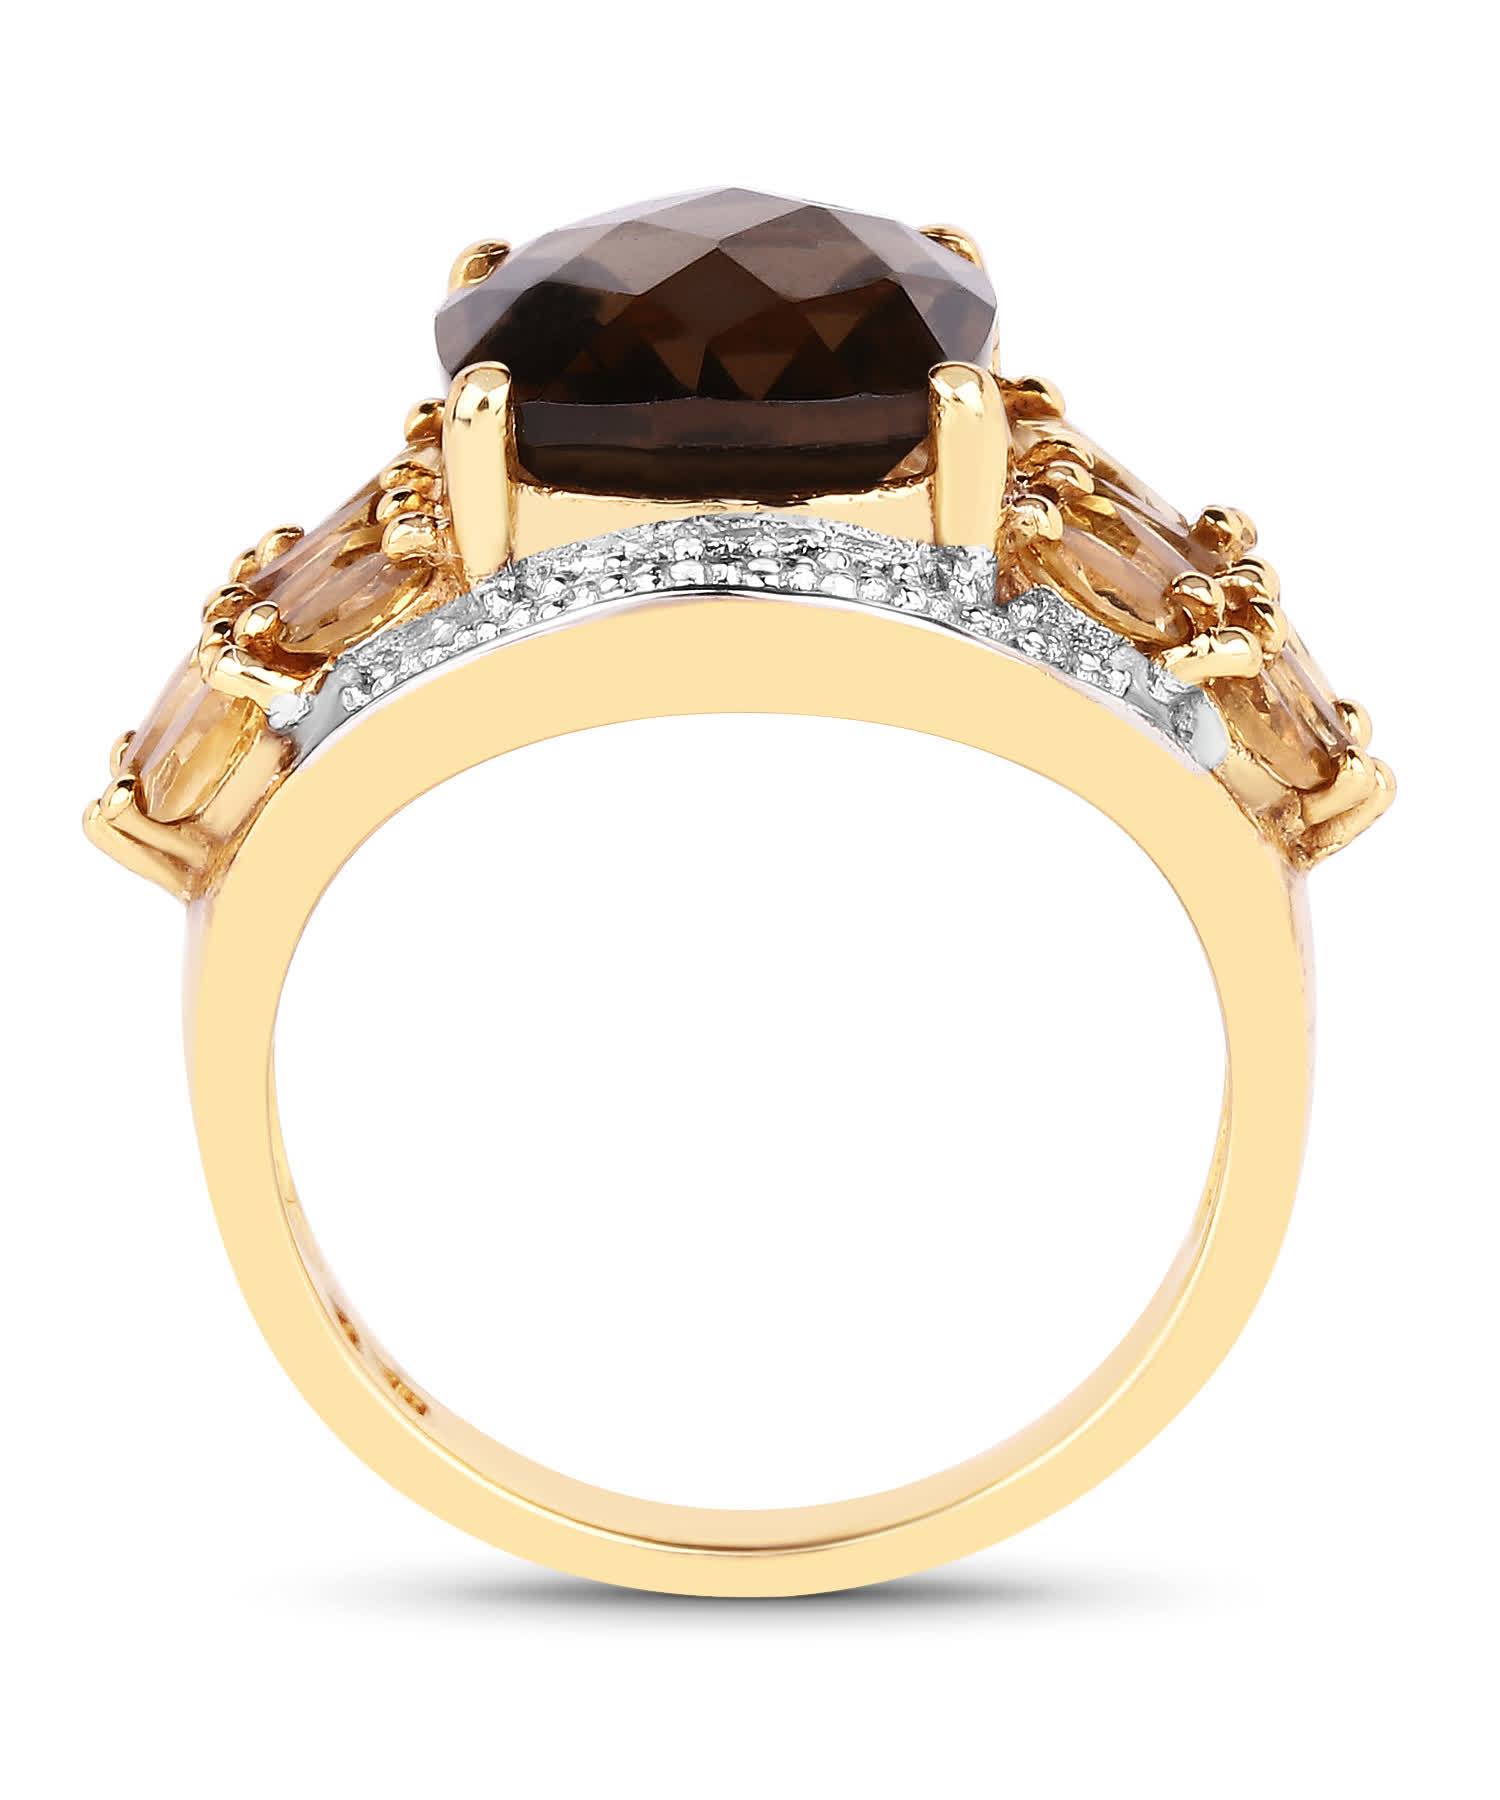 5.44ctw Natural Smoky Quartz and Honey Citrine 14k Gold Plated Cocktail Ring View 2